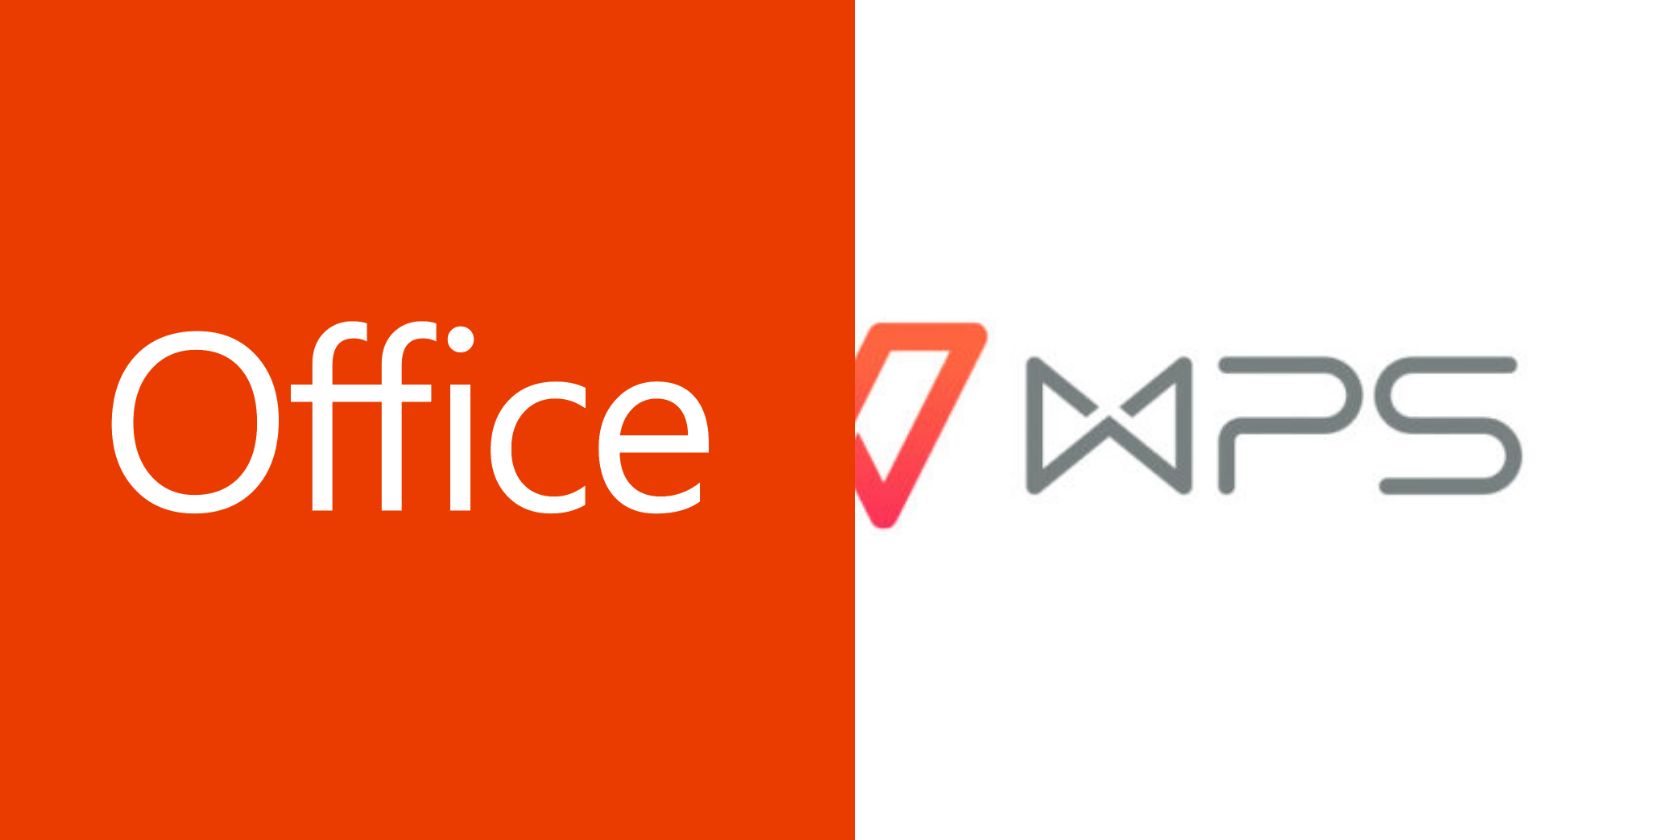 MS Office to WPS Office